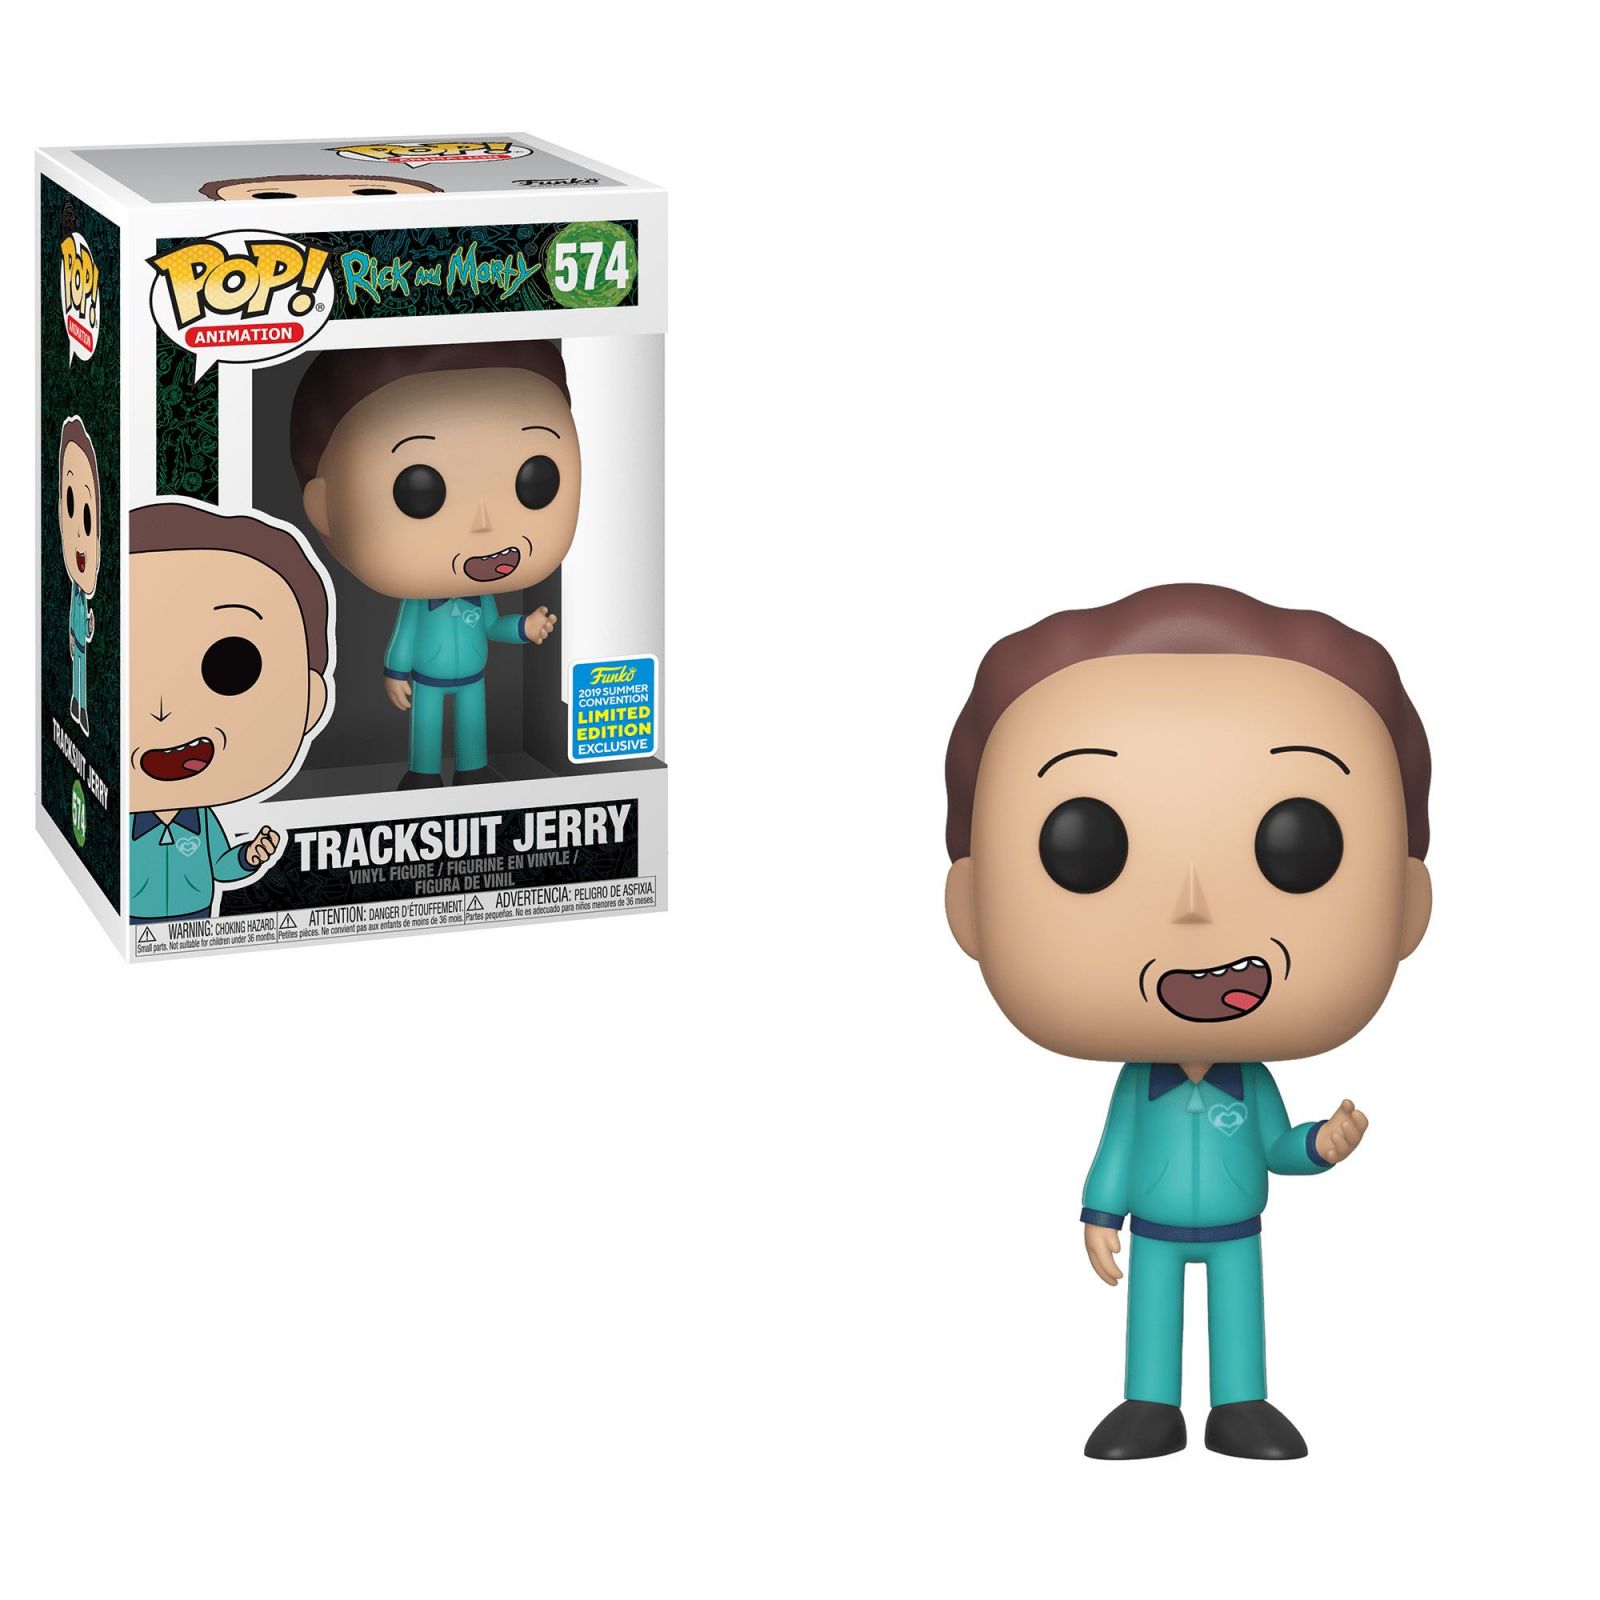 Rick and Morty POP! Animation Vinyl Figure Tracksuit Jerry SDCC Exclusive 9 cm Funko